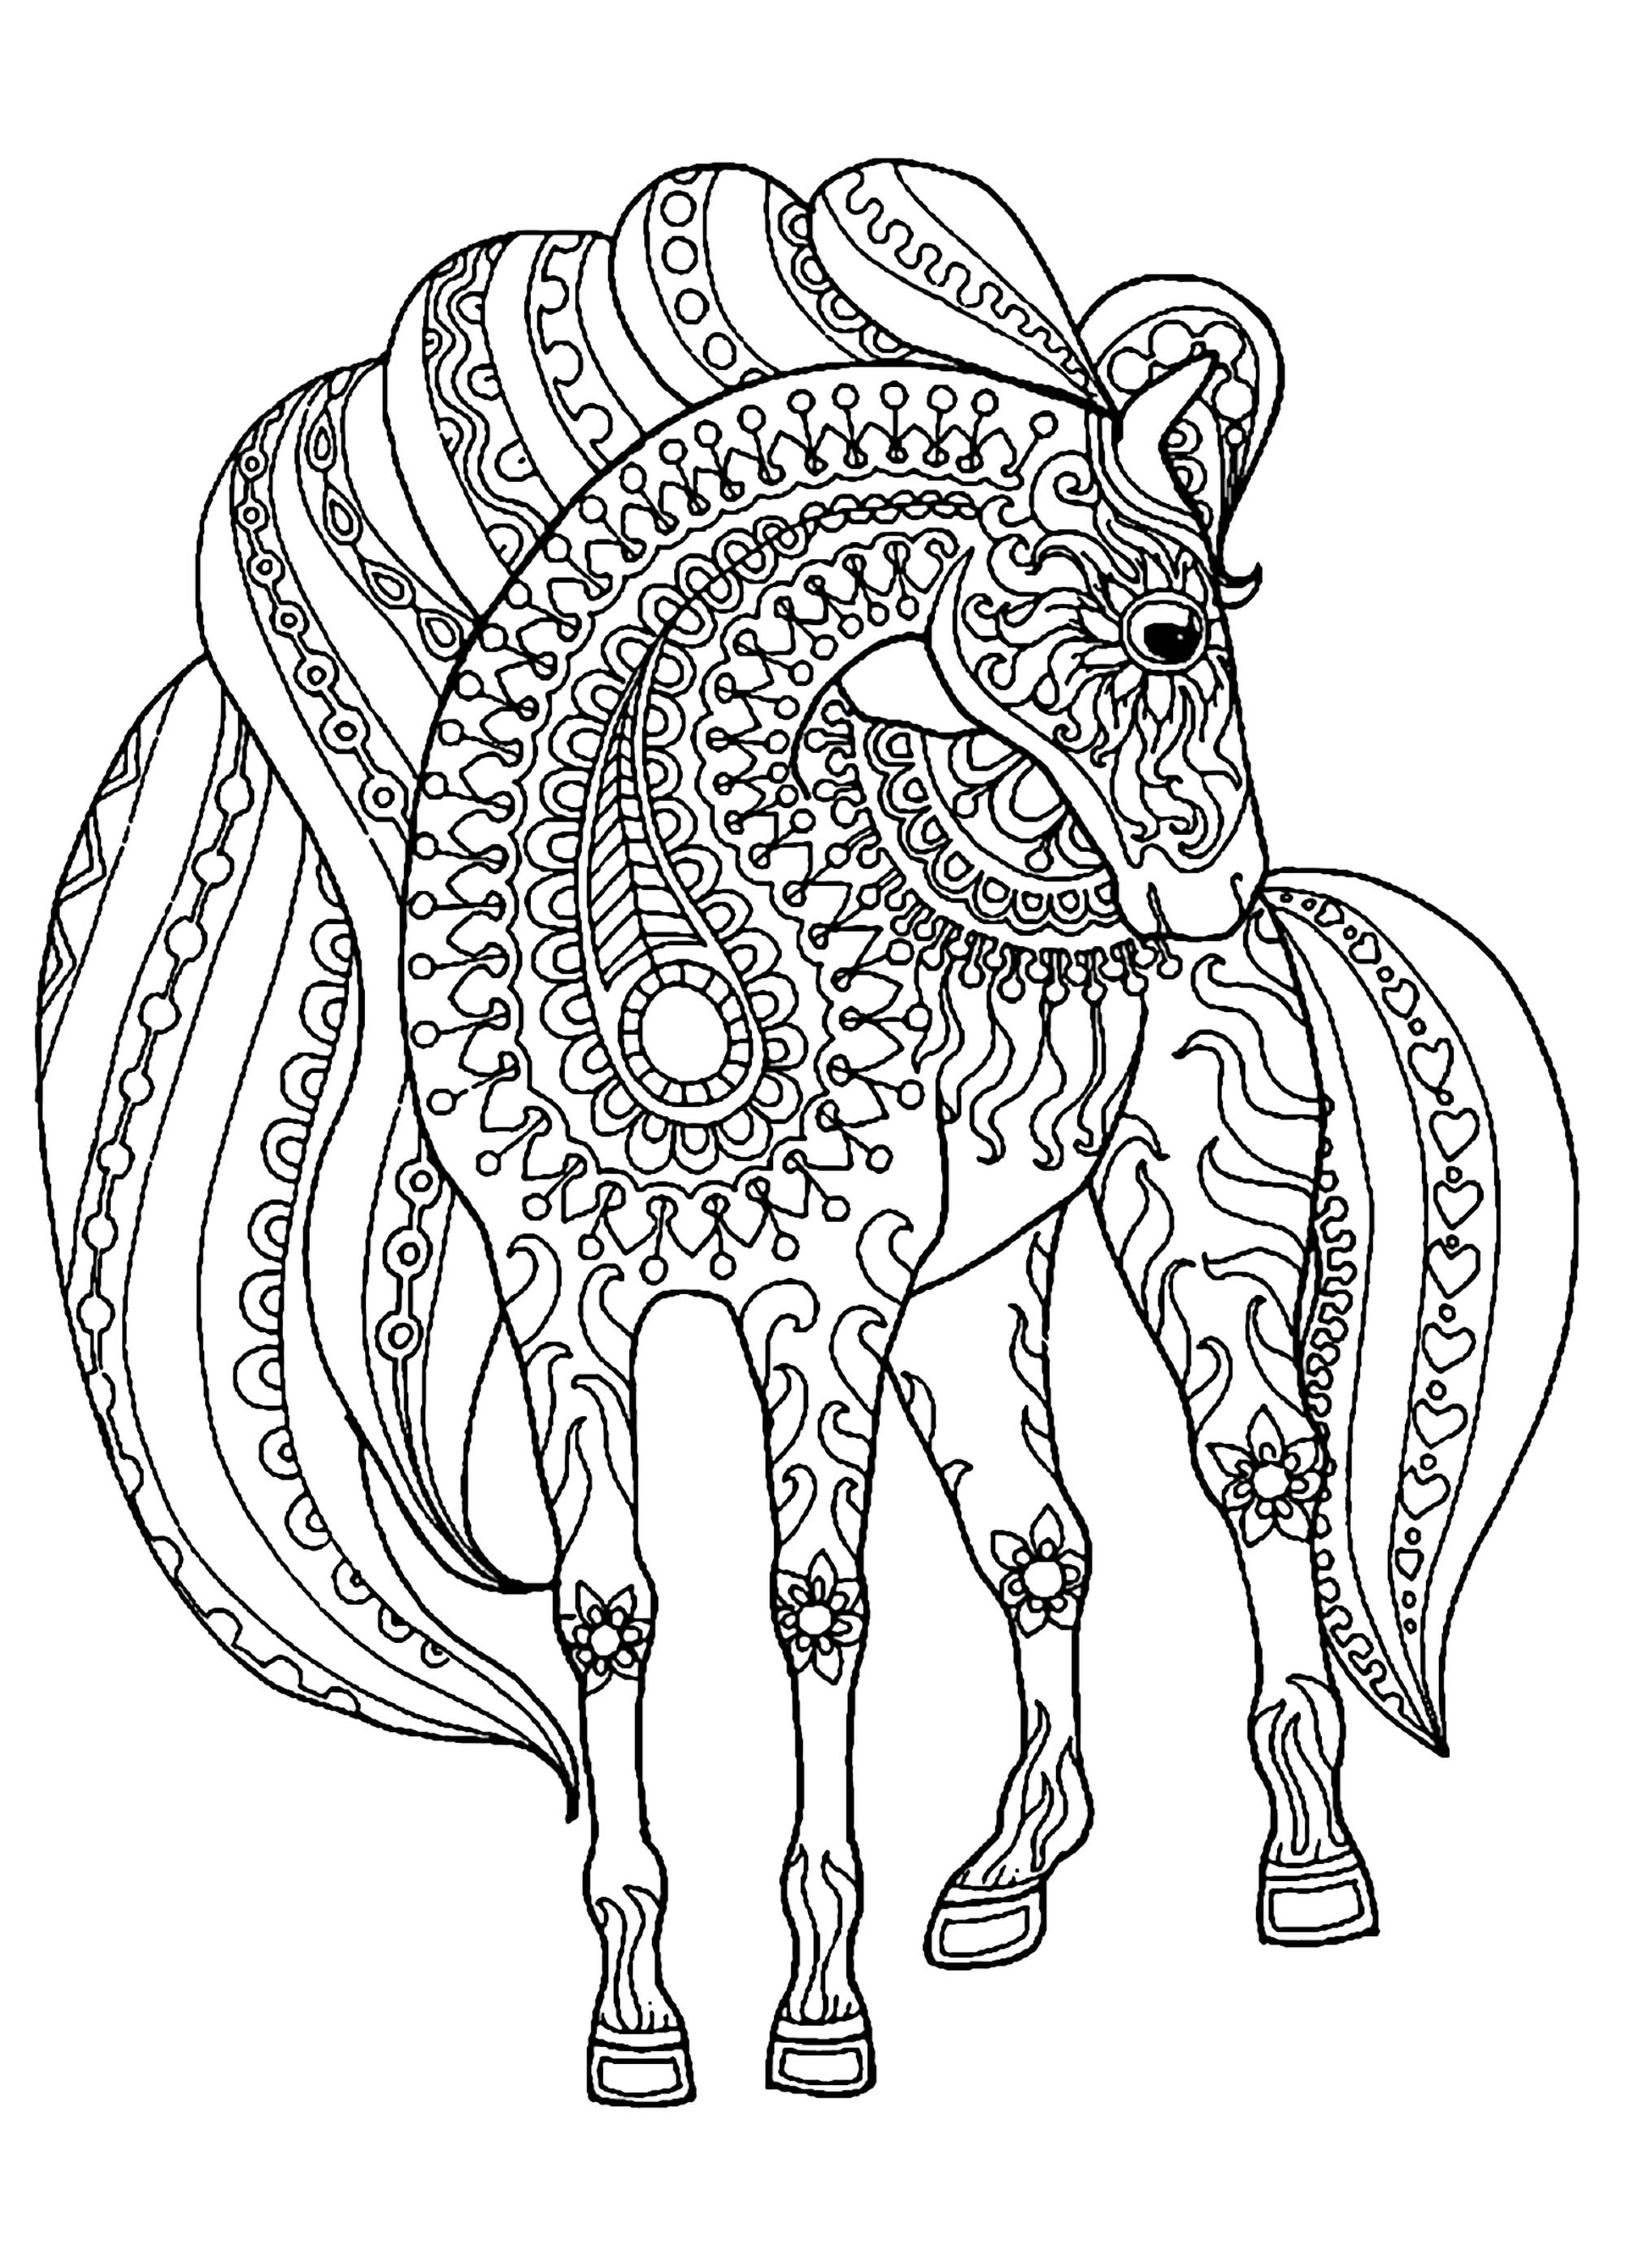 Horse Coloring Pages for Adults Best Coloring Pages For Kids